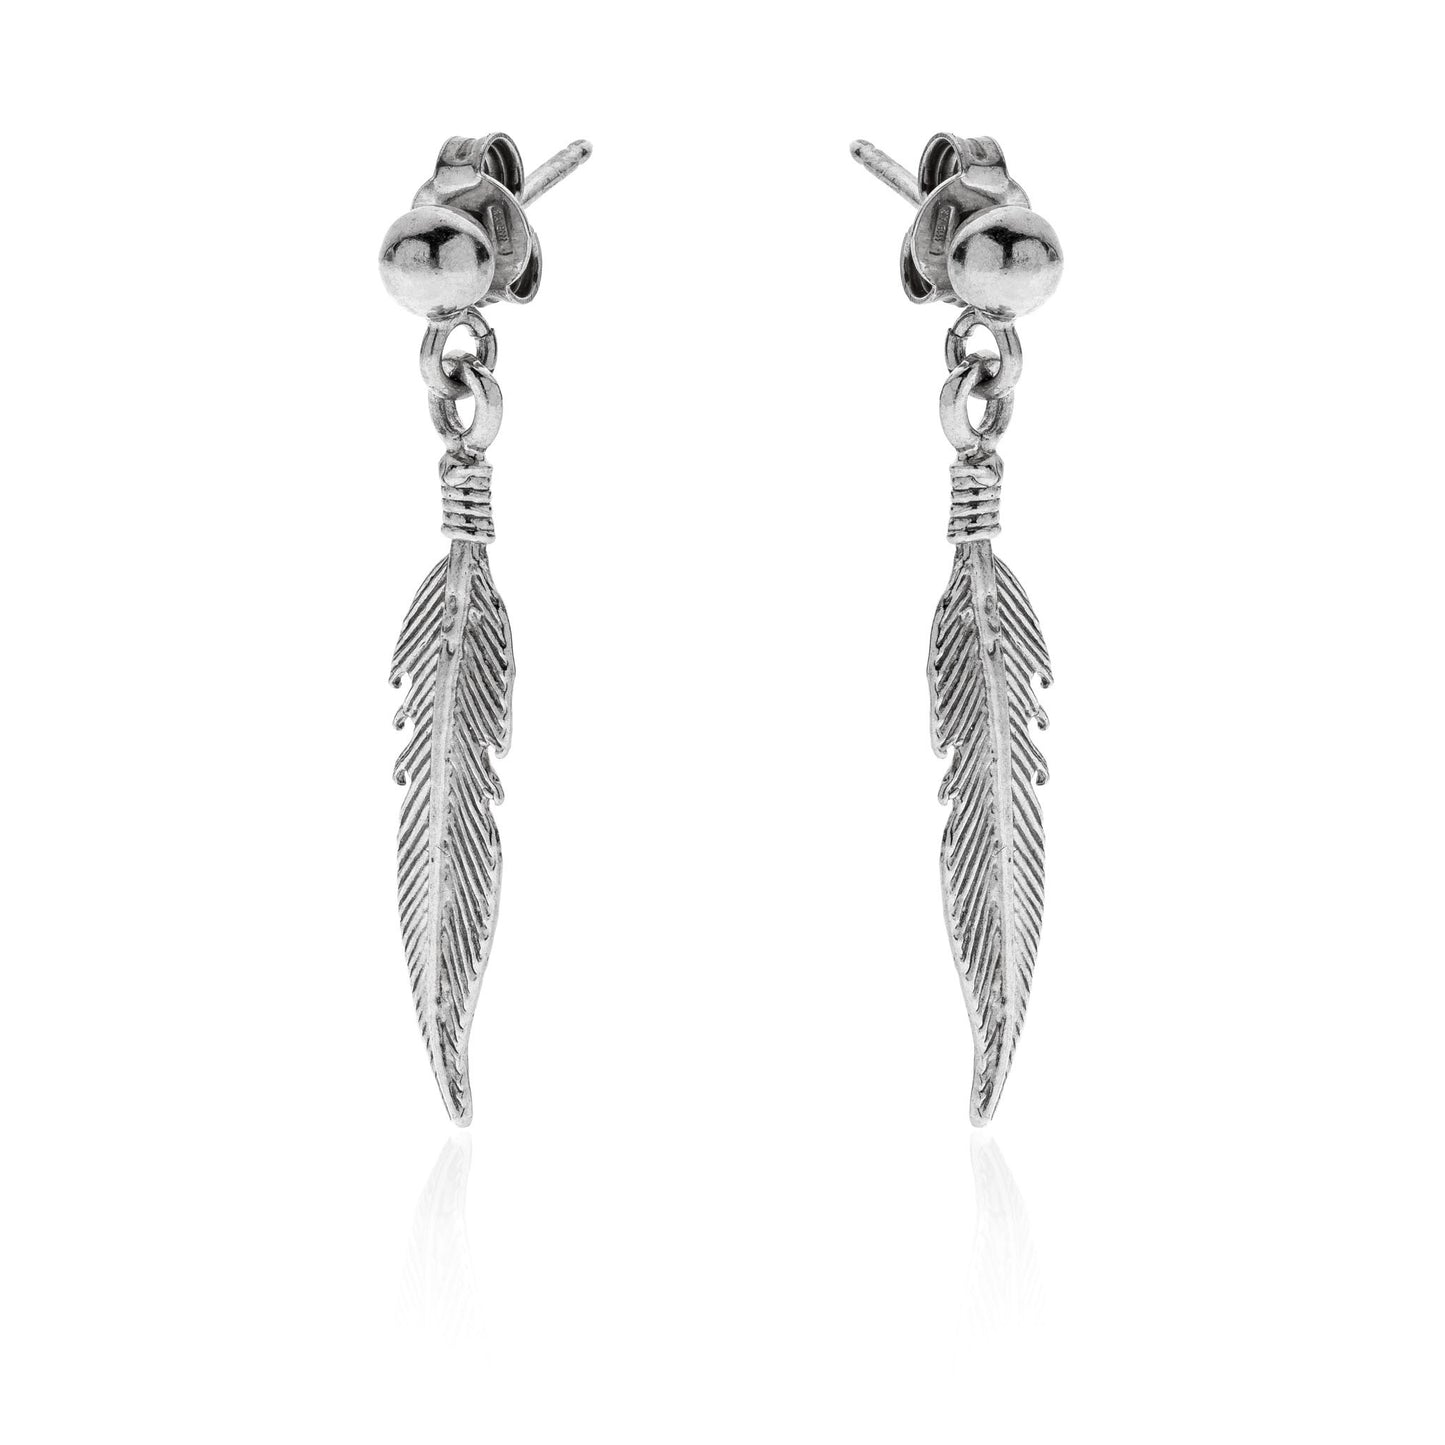 GABRIEL Pending Feathers sterling silver 925 earrings #MS044OR - MARIA SALVADOR